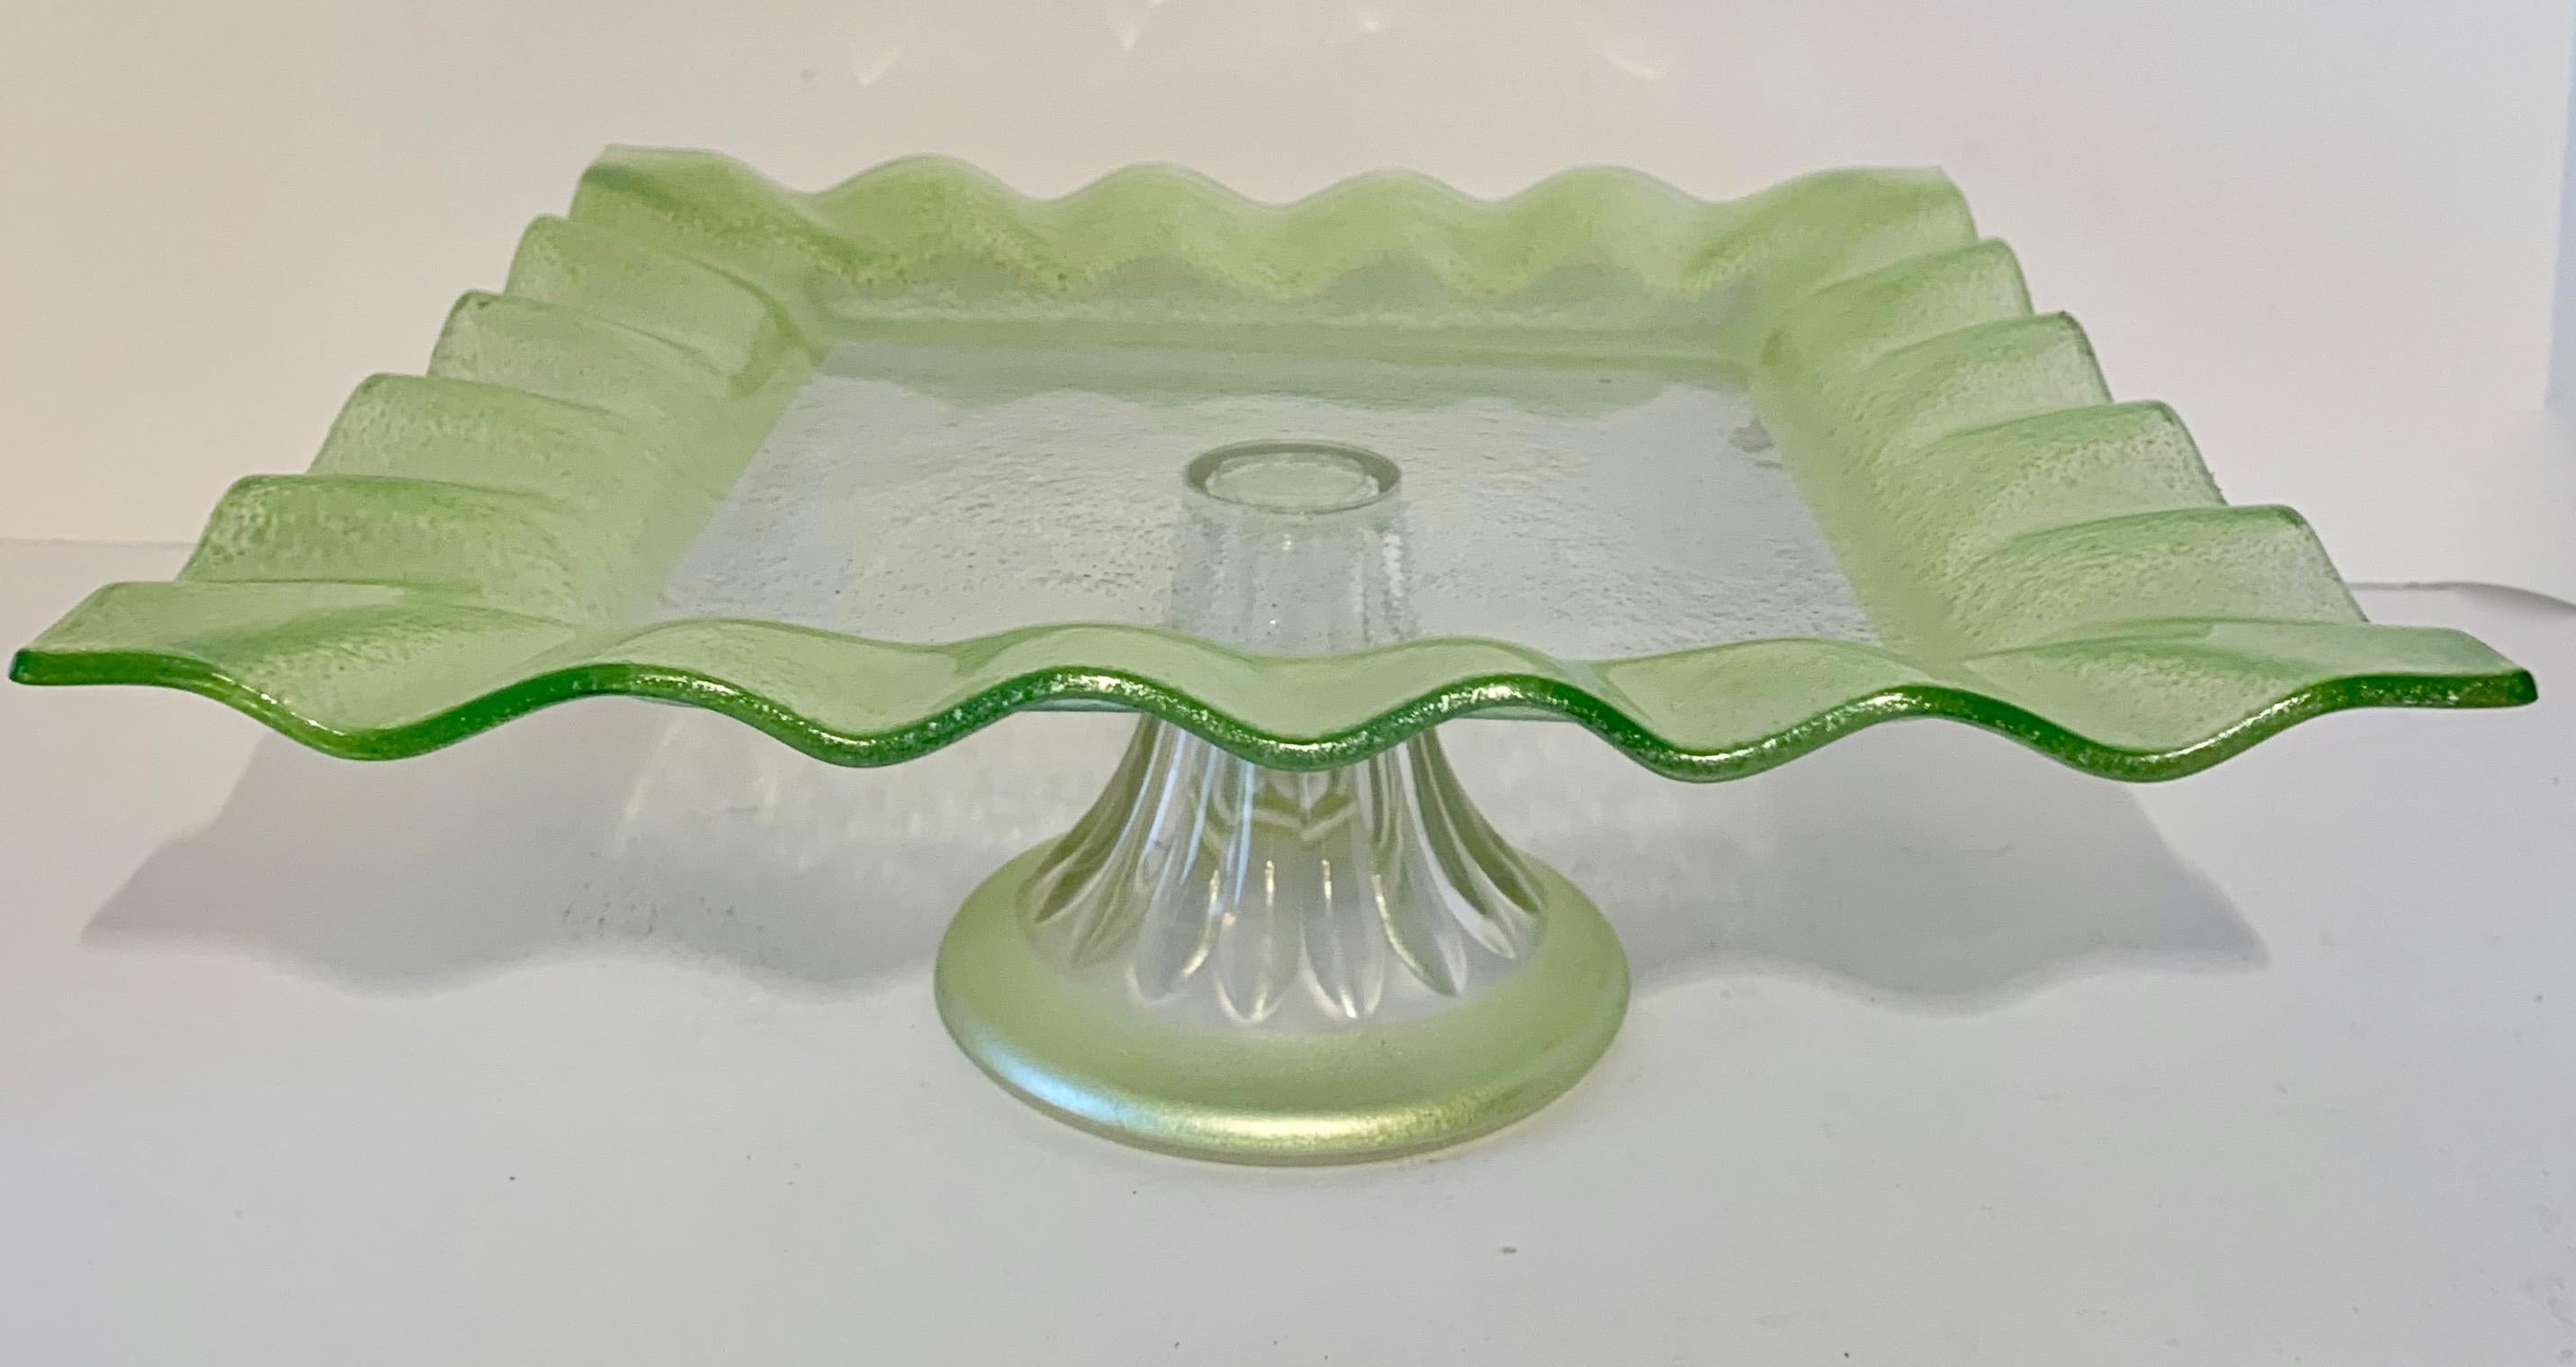 A square glass footed cake or pastry display plate with glass 'Ruffle' around the perimeter. The footed plate is made of glass that has been tinted Celadon around the edge of the Ruffle detail and Base... wonderful for displaying cakes or other